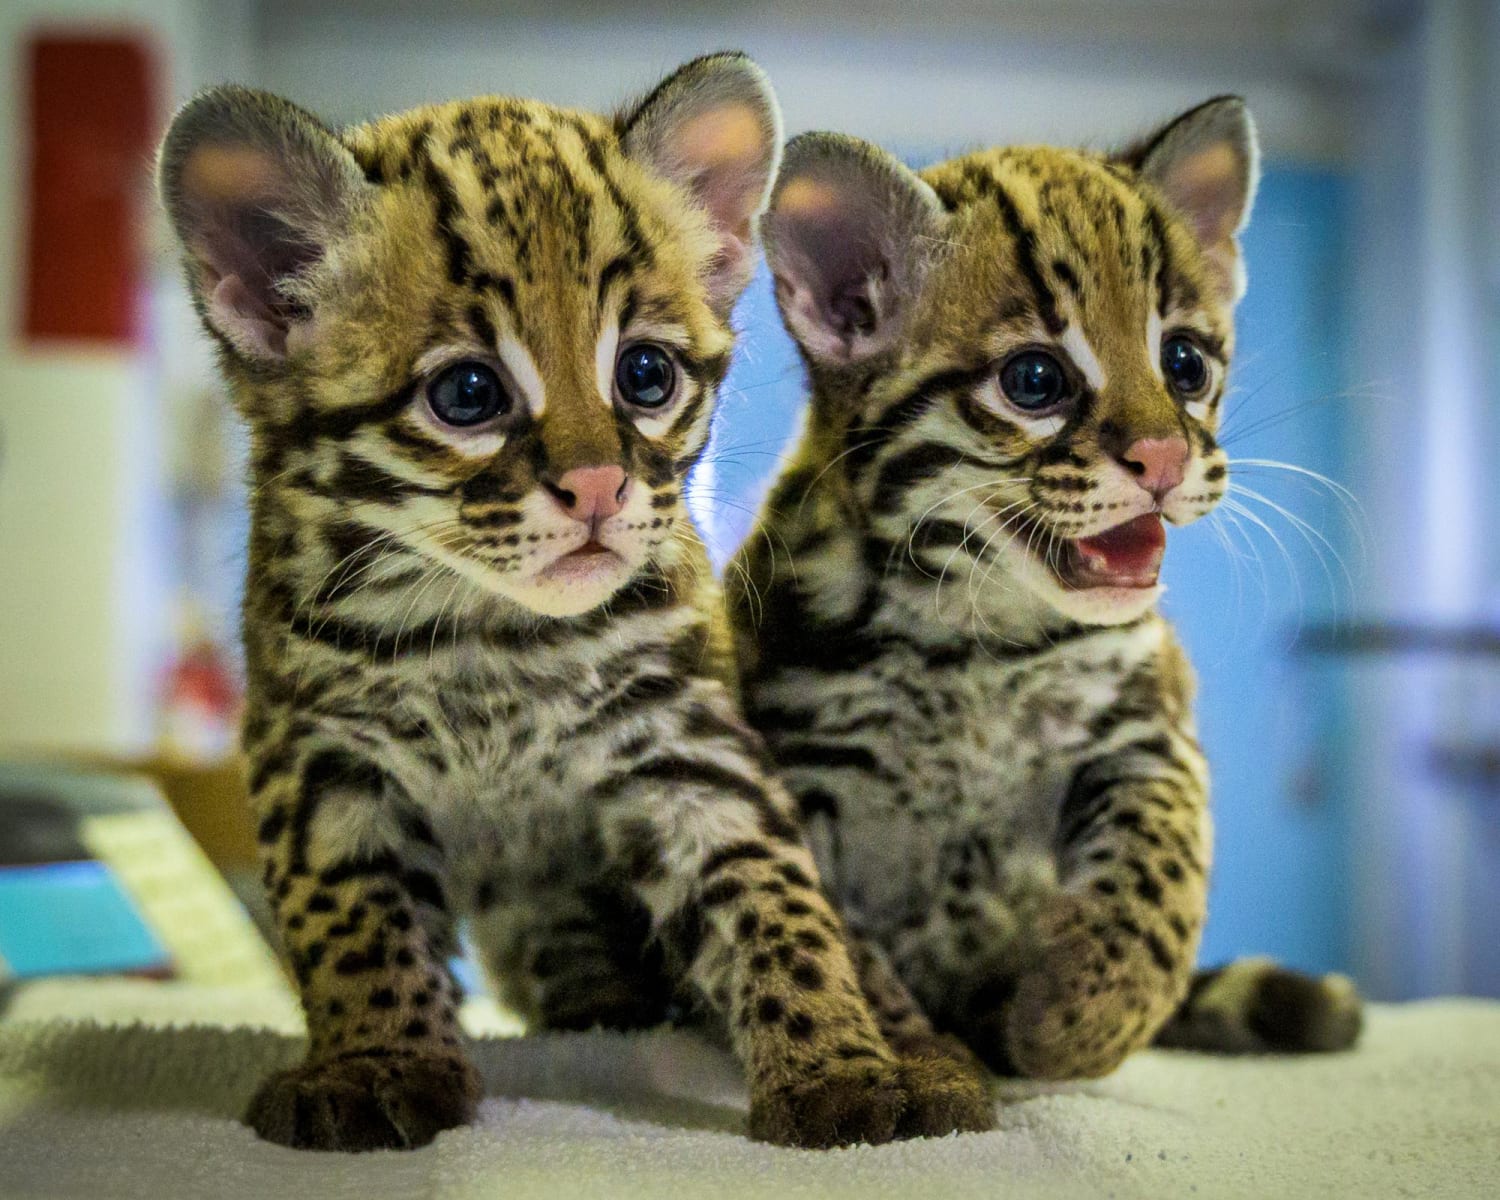 After a gestation period of 2-3 months, a female ocelot gives birth to a litter of 1-3 kittens. They stay with their mother for up to 2 years in the wild. Afterwards, they will establish their own home ranges. In 2019, the Albuquerque Biopark in New Mexico welcomed their first ever ocelot kittens.